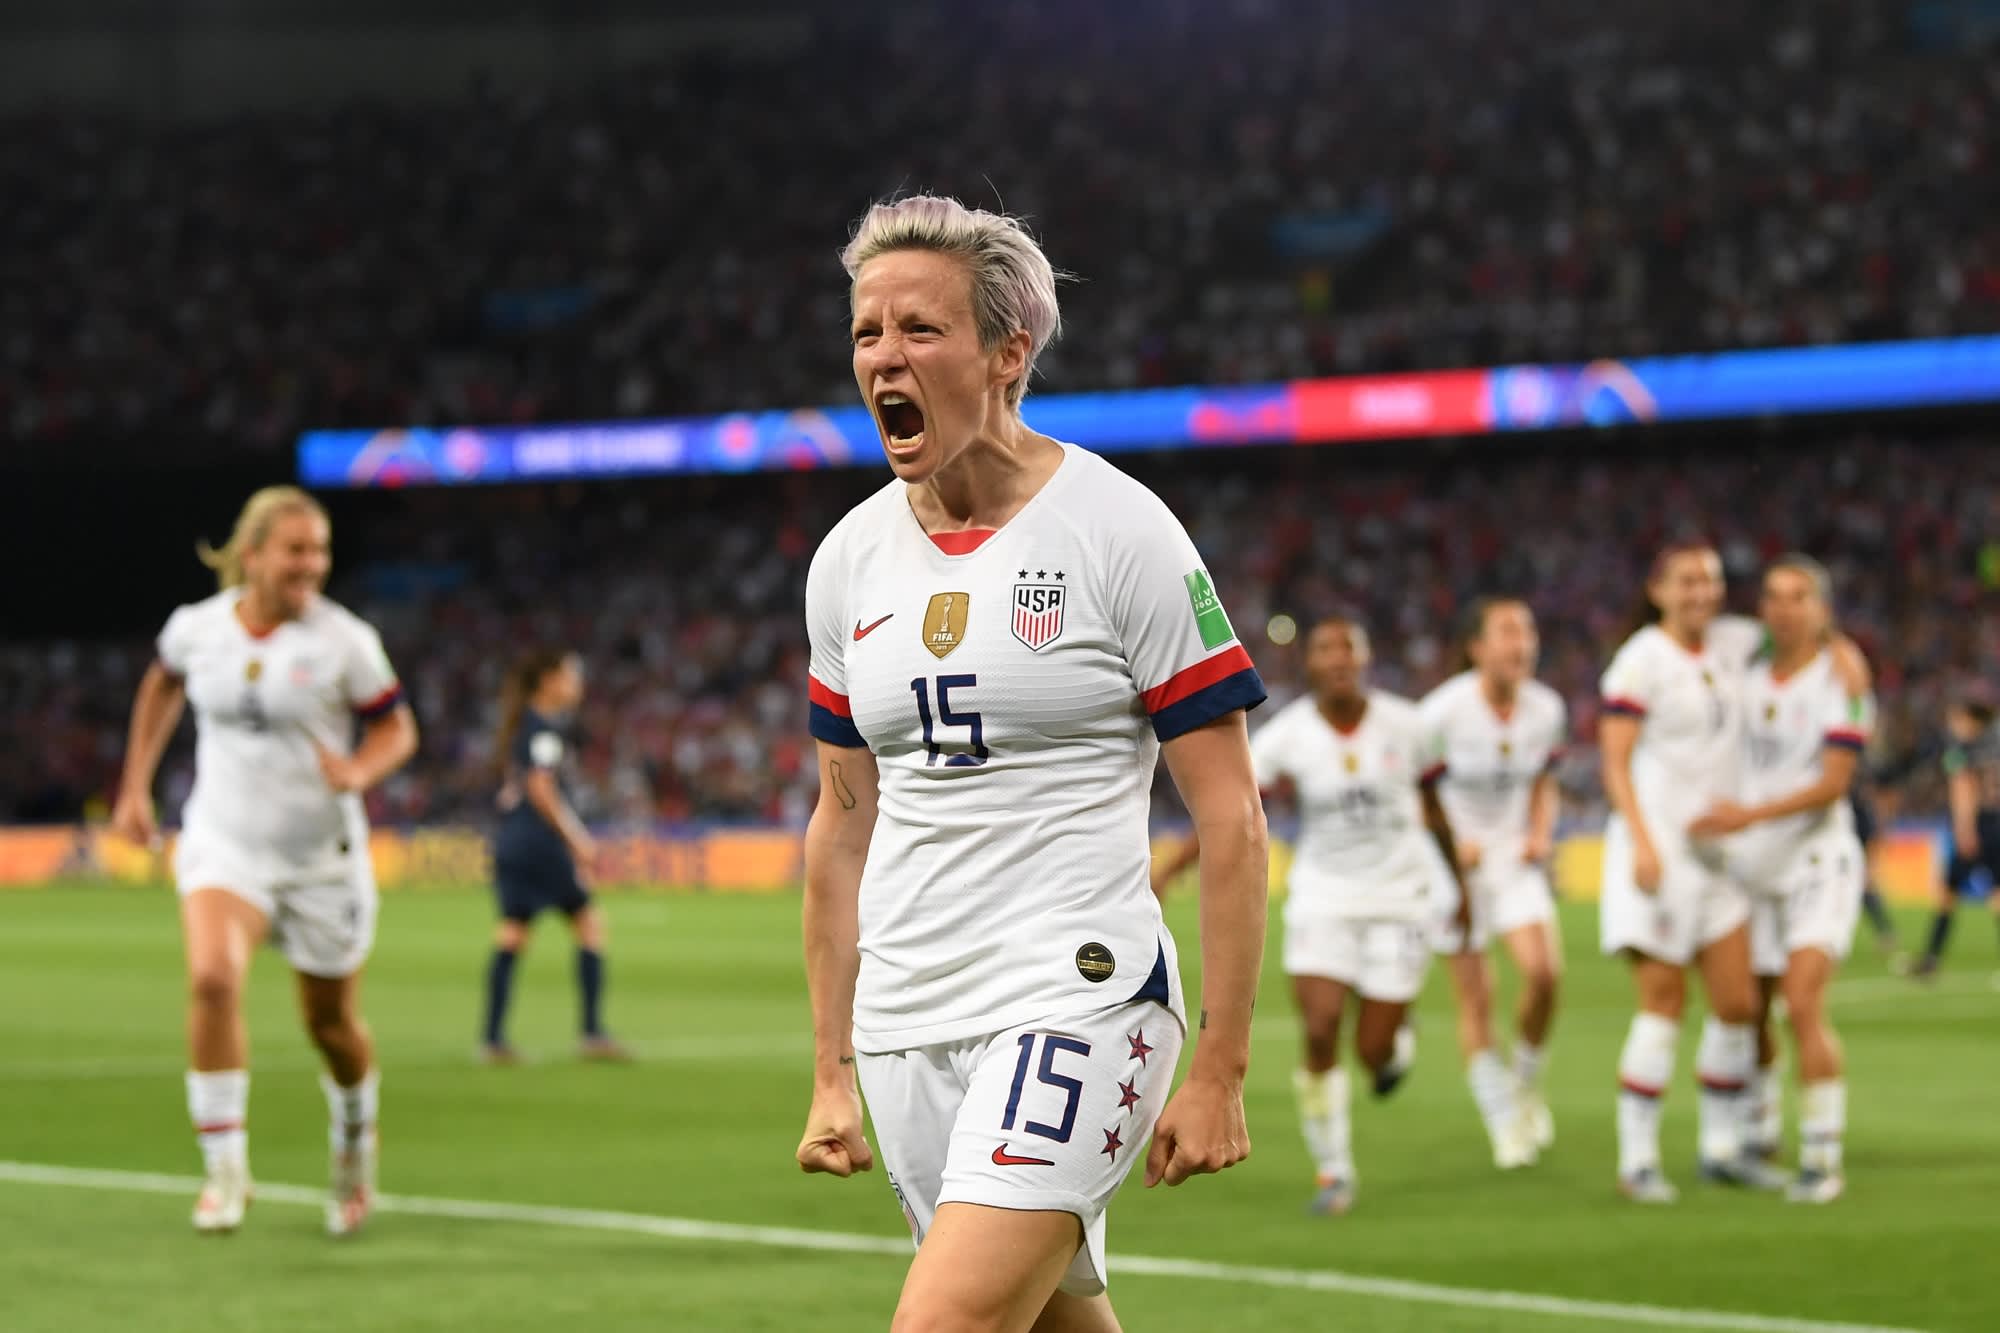 Nike wins big as the US women's soccer team takes the World Cup